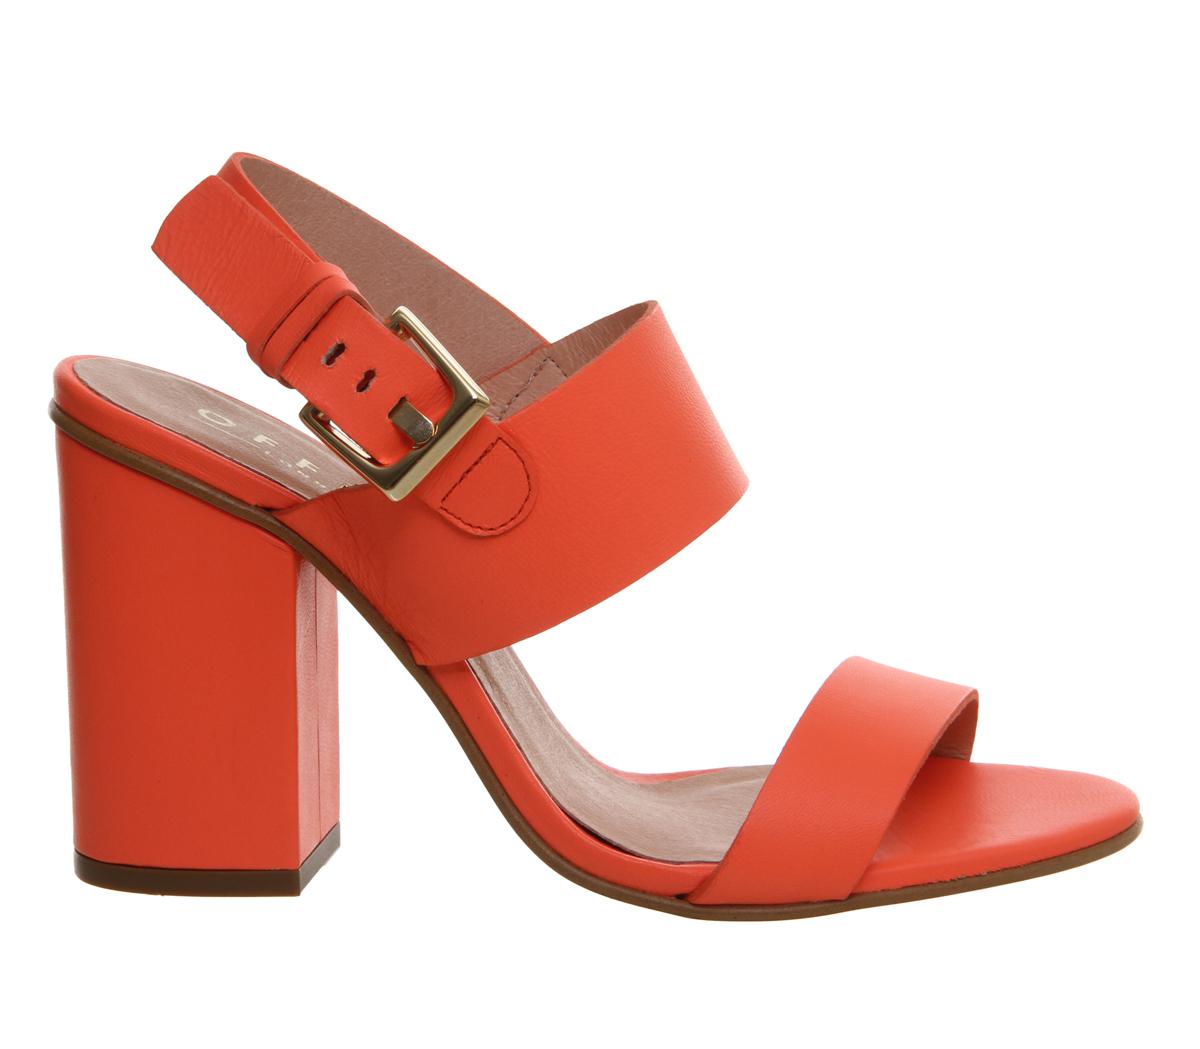 Office Leather Garland Strappy Block Heels in Coral (Orange) - Lyst